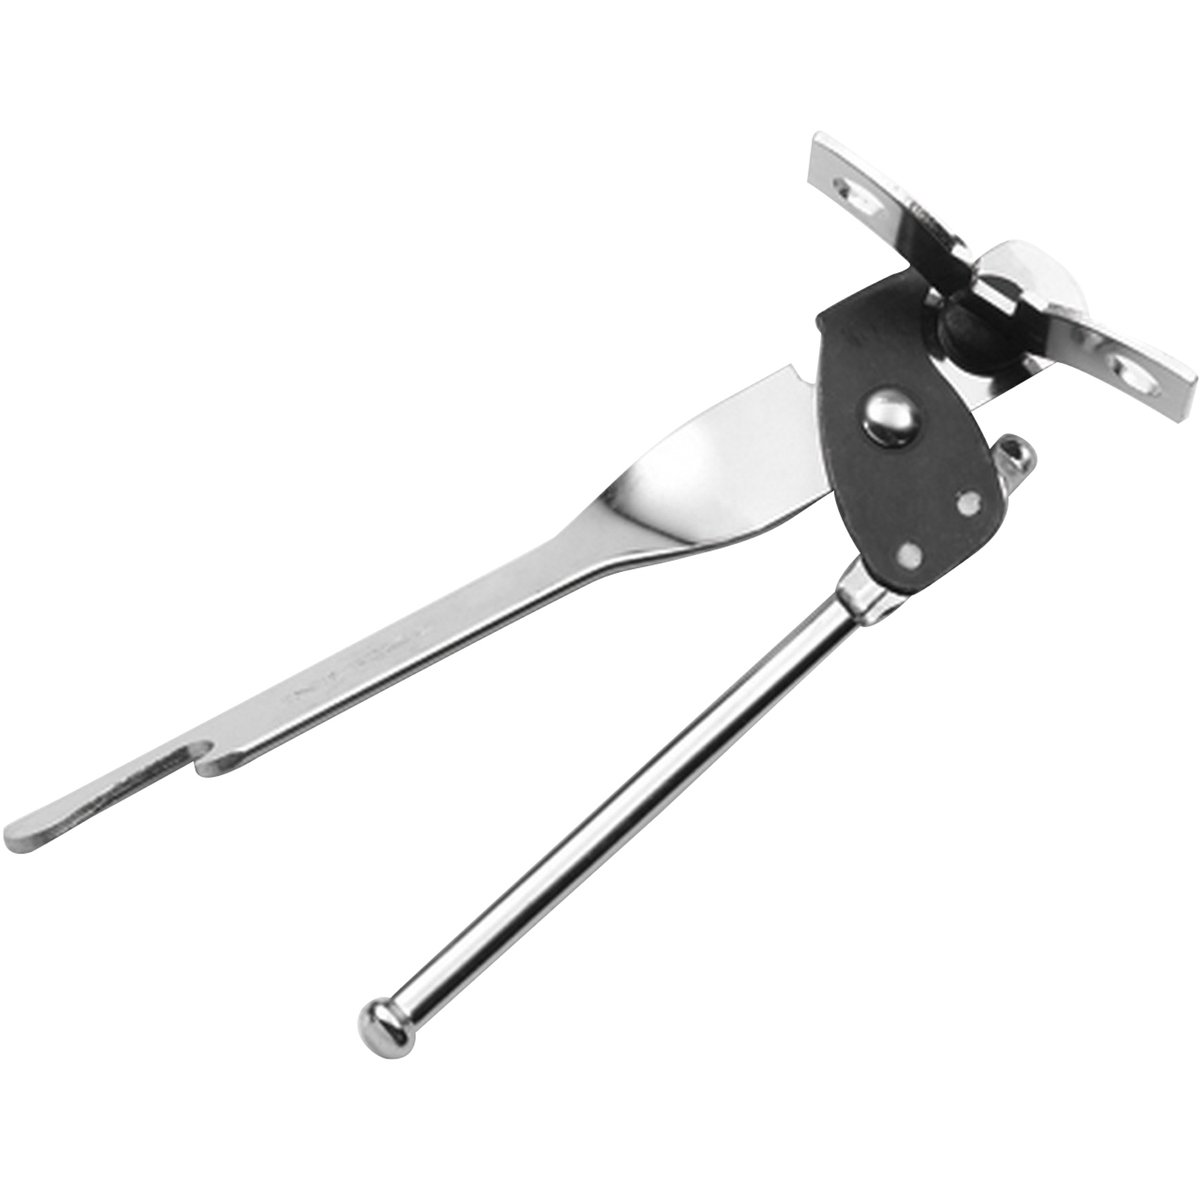 Pedrini Butterfly Can Opener with Cap Lifter